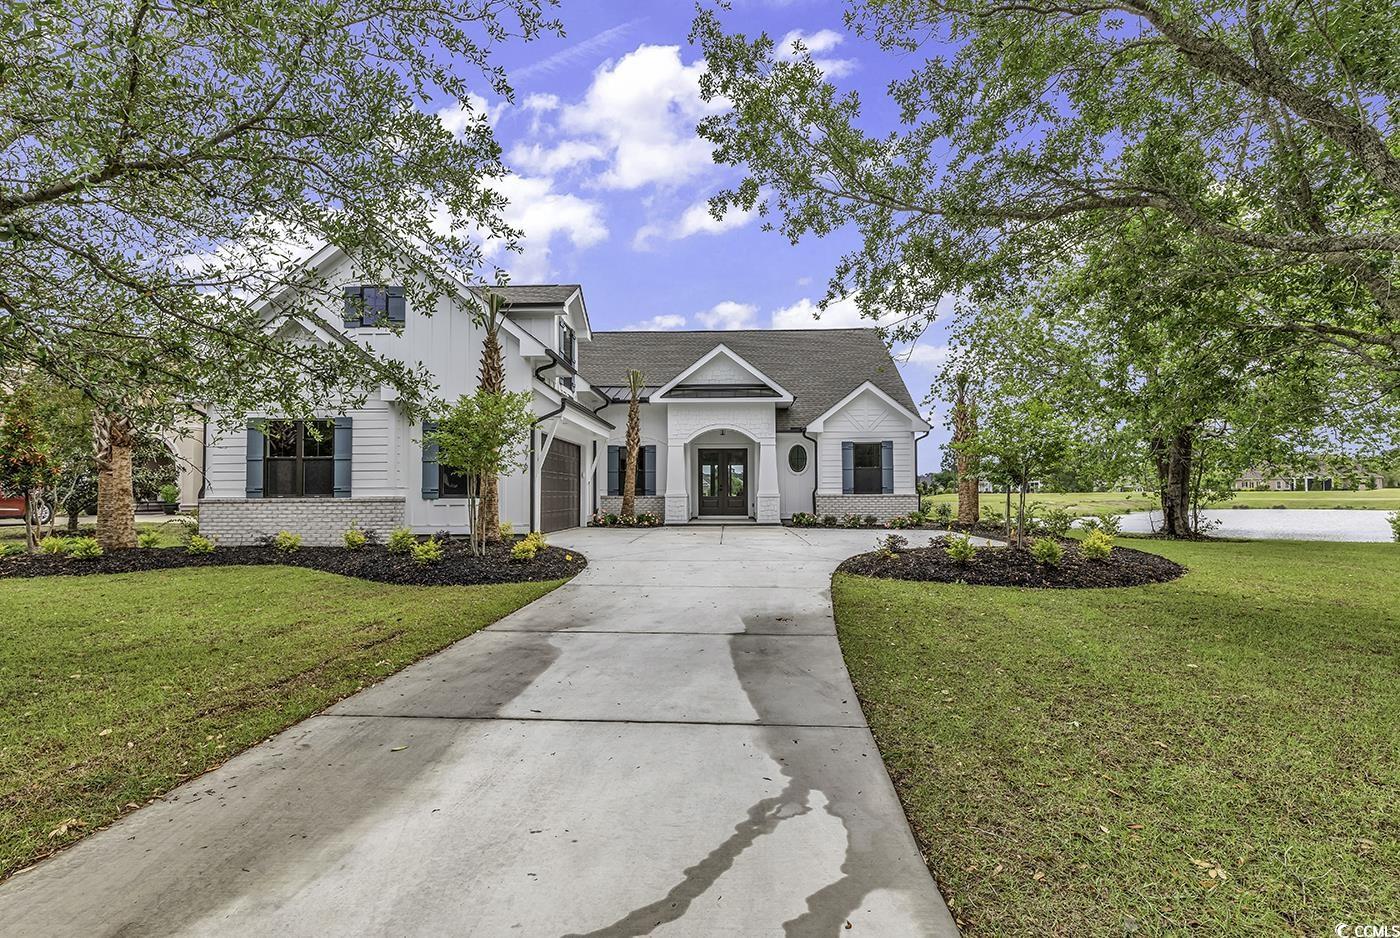 welcome to your "dream home" here at the beach.  ideally located just off hwy 501 in between myrtle beach and conway in the prestigious golf neighborhood of wild wing.  you will love the quintessential expansive view of the pond and golf course in your backyard. renowned nations homes is the builder of this well-designed custom plan.  walk in the door and immediately feel at home with the great room concept.  features include a large owners suite with spacious walk-in closets that are finished with custom melamine shelving.  plus a well designed en suite with double vanities, walk-in shower and private bathroom.  the large great room has a vaulted ceiling with beams, fireplace, floating cabinets and bookshelves. enjoy cooking in your designer kitchen with stainless steel appliances, solid cabinets with soft close doors and high-quality quartz countertops.  bedrooms 2 and 3 each have an attached full bath.  bedroom 4/guest suite is located for privacy and perfect for your guests.  lush landscaping is ideally located to provide the best presentation as you arrive.   you deserve this custom home and the accompanying lifestyle.